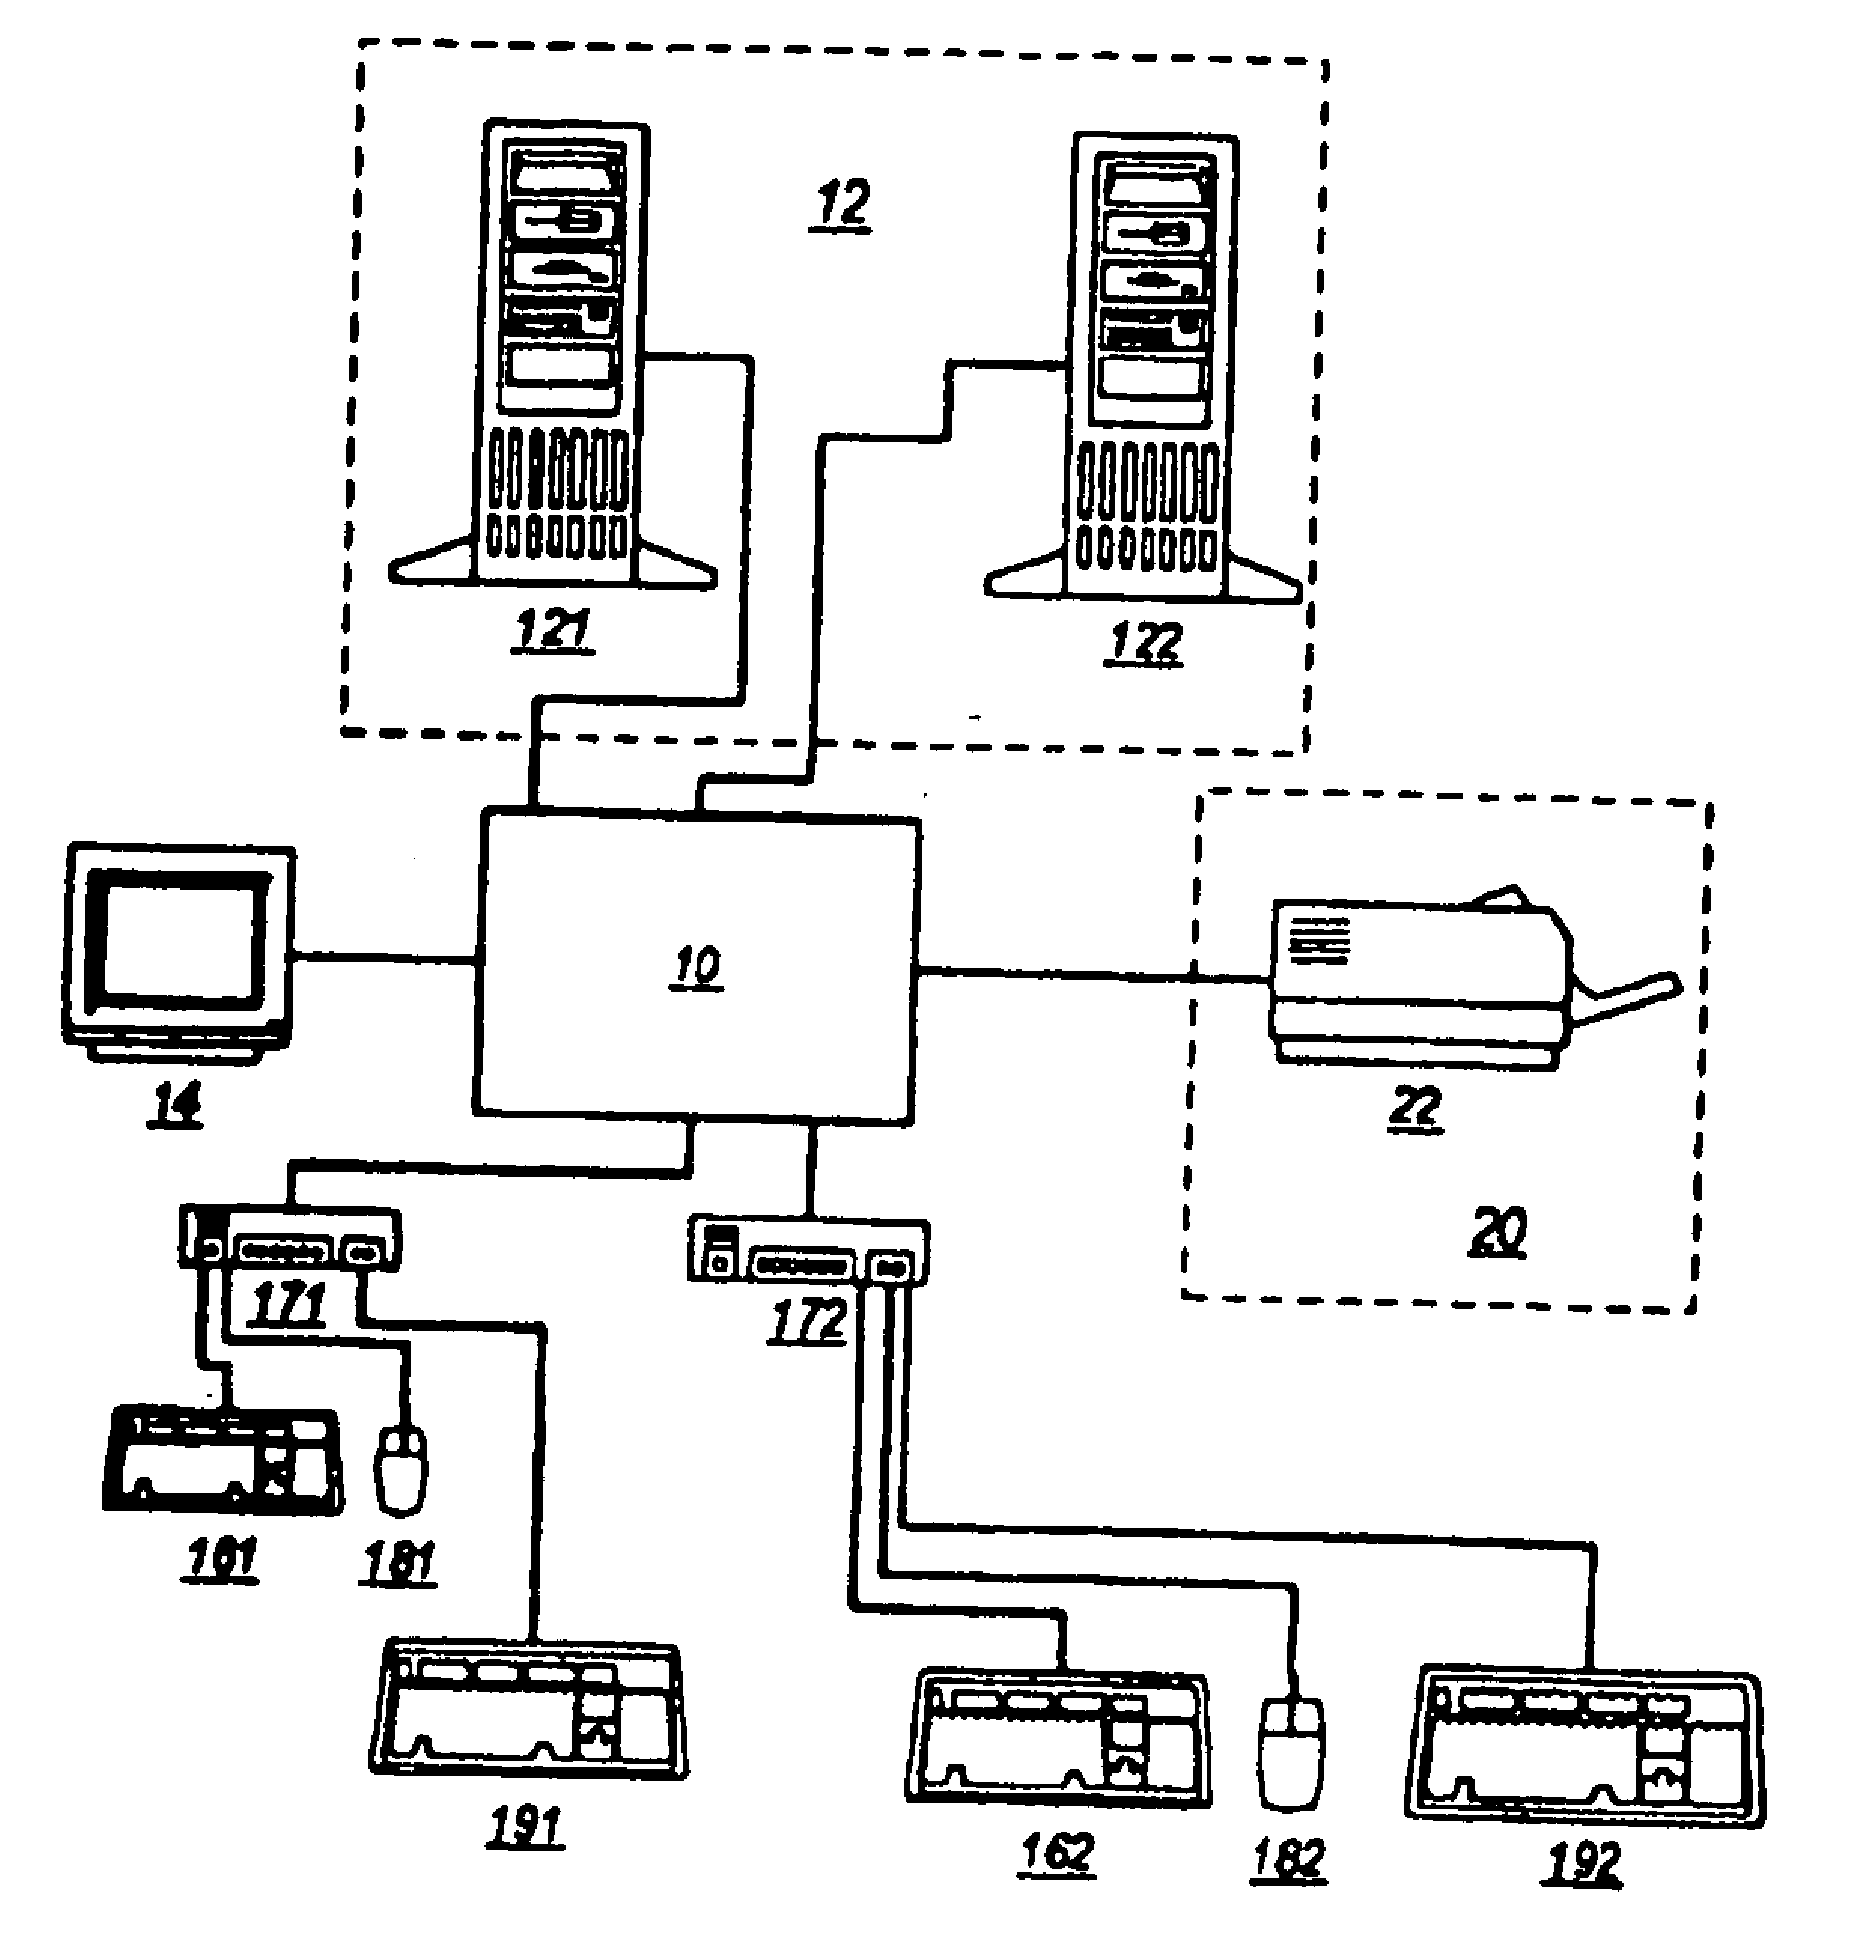 Asynchronous/synchronous kvmp switch for console devices and peripheral devices